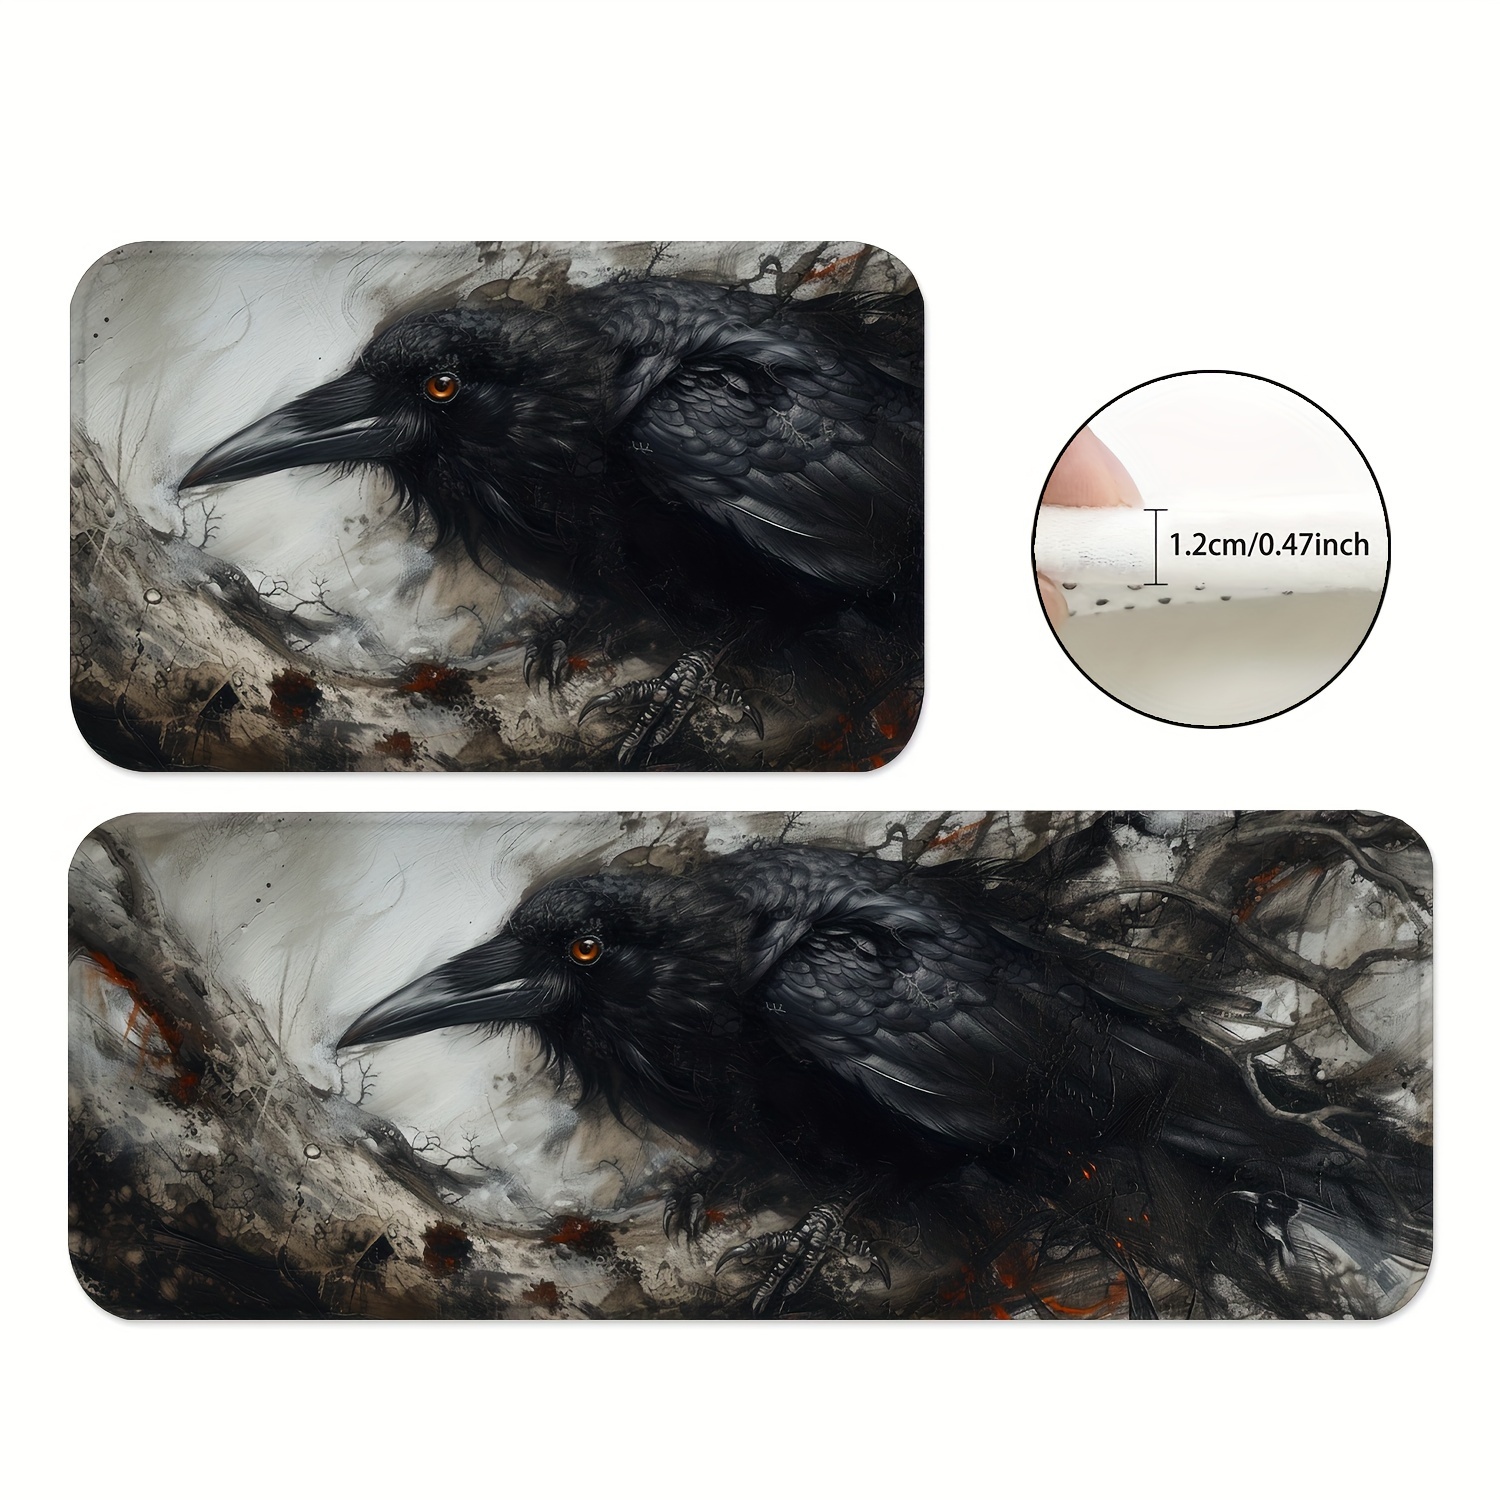 

1/2pcs, Black Raven Mats, Non-slip Backing Rugs, Water Absorbent Carpet For Playroom, Classroom, Bathroom, Dining Table, Kitchen, Area Rug, Home Decor, Room Decor, Spring Decor, Gift